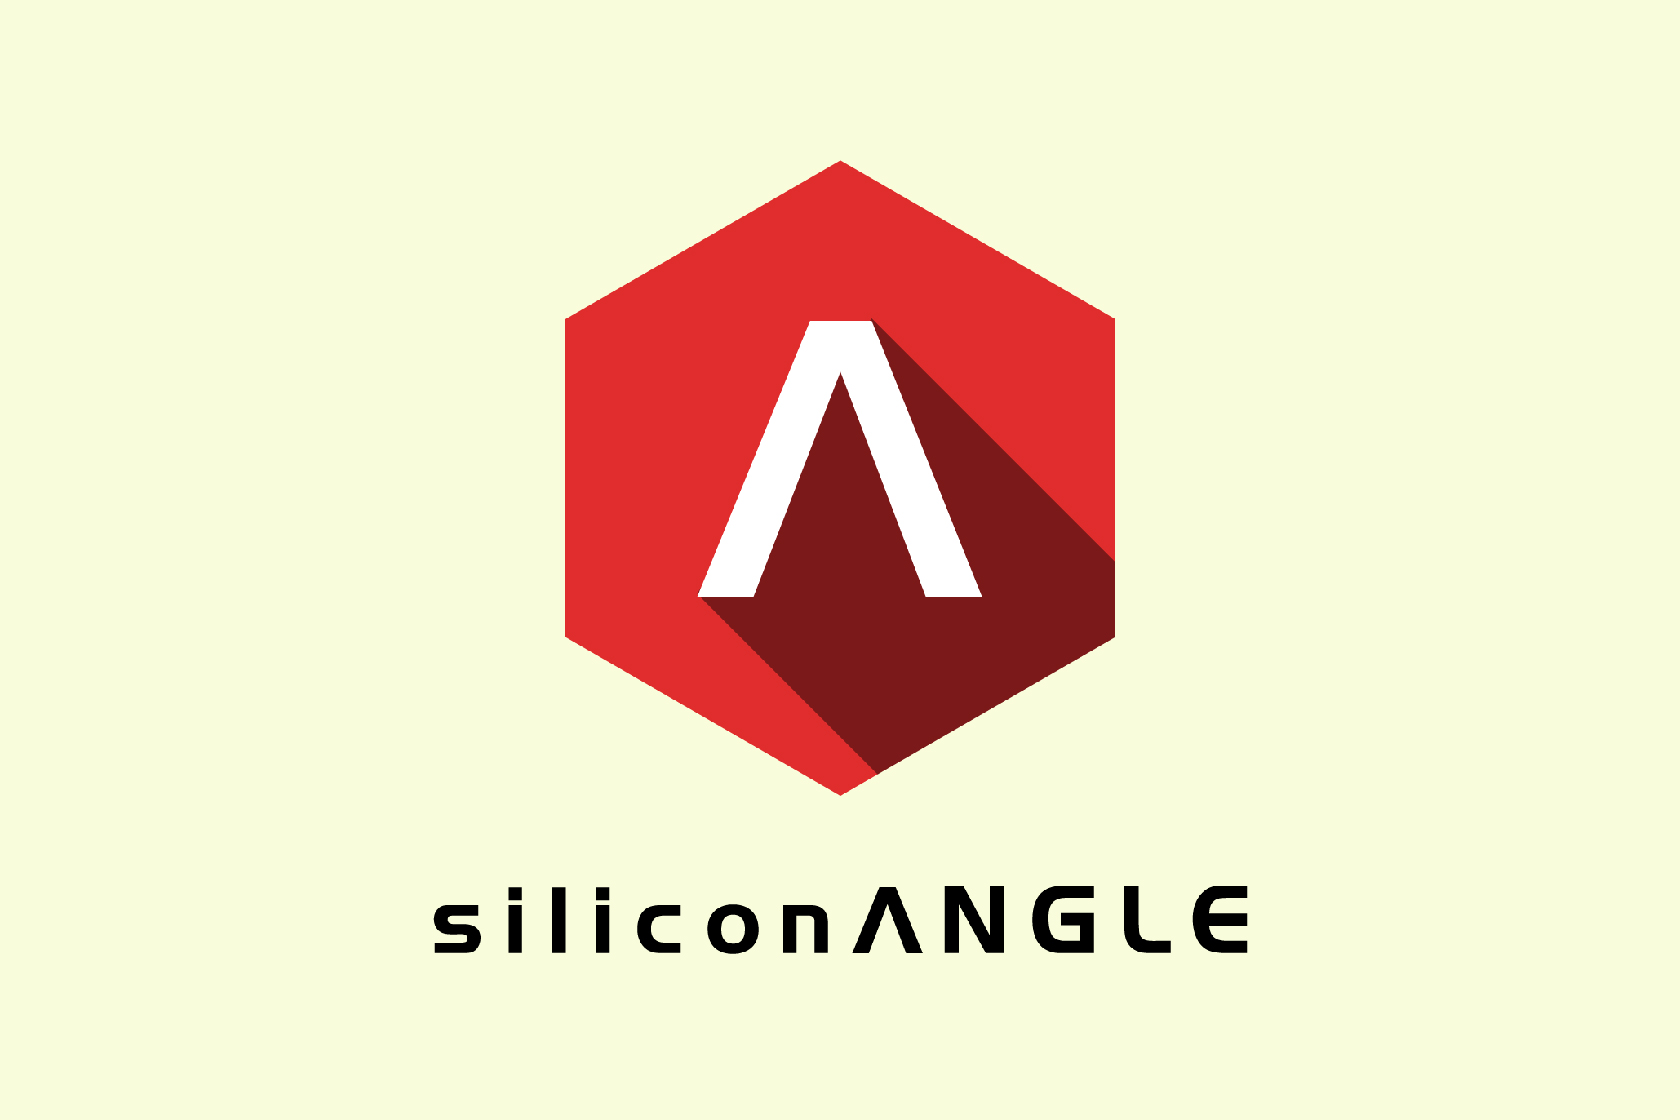 Logo for Silicon Angle, featuring a stylized letter "S" in metallic silver on a black background.